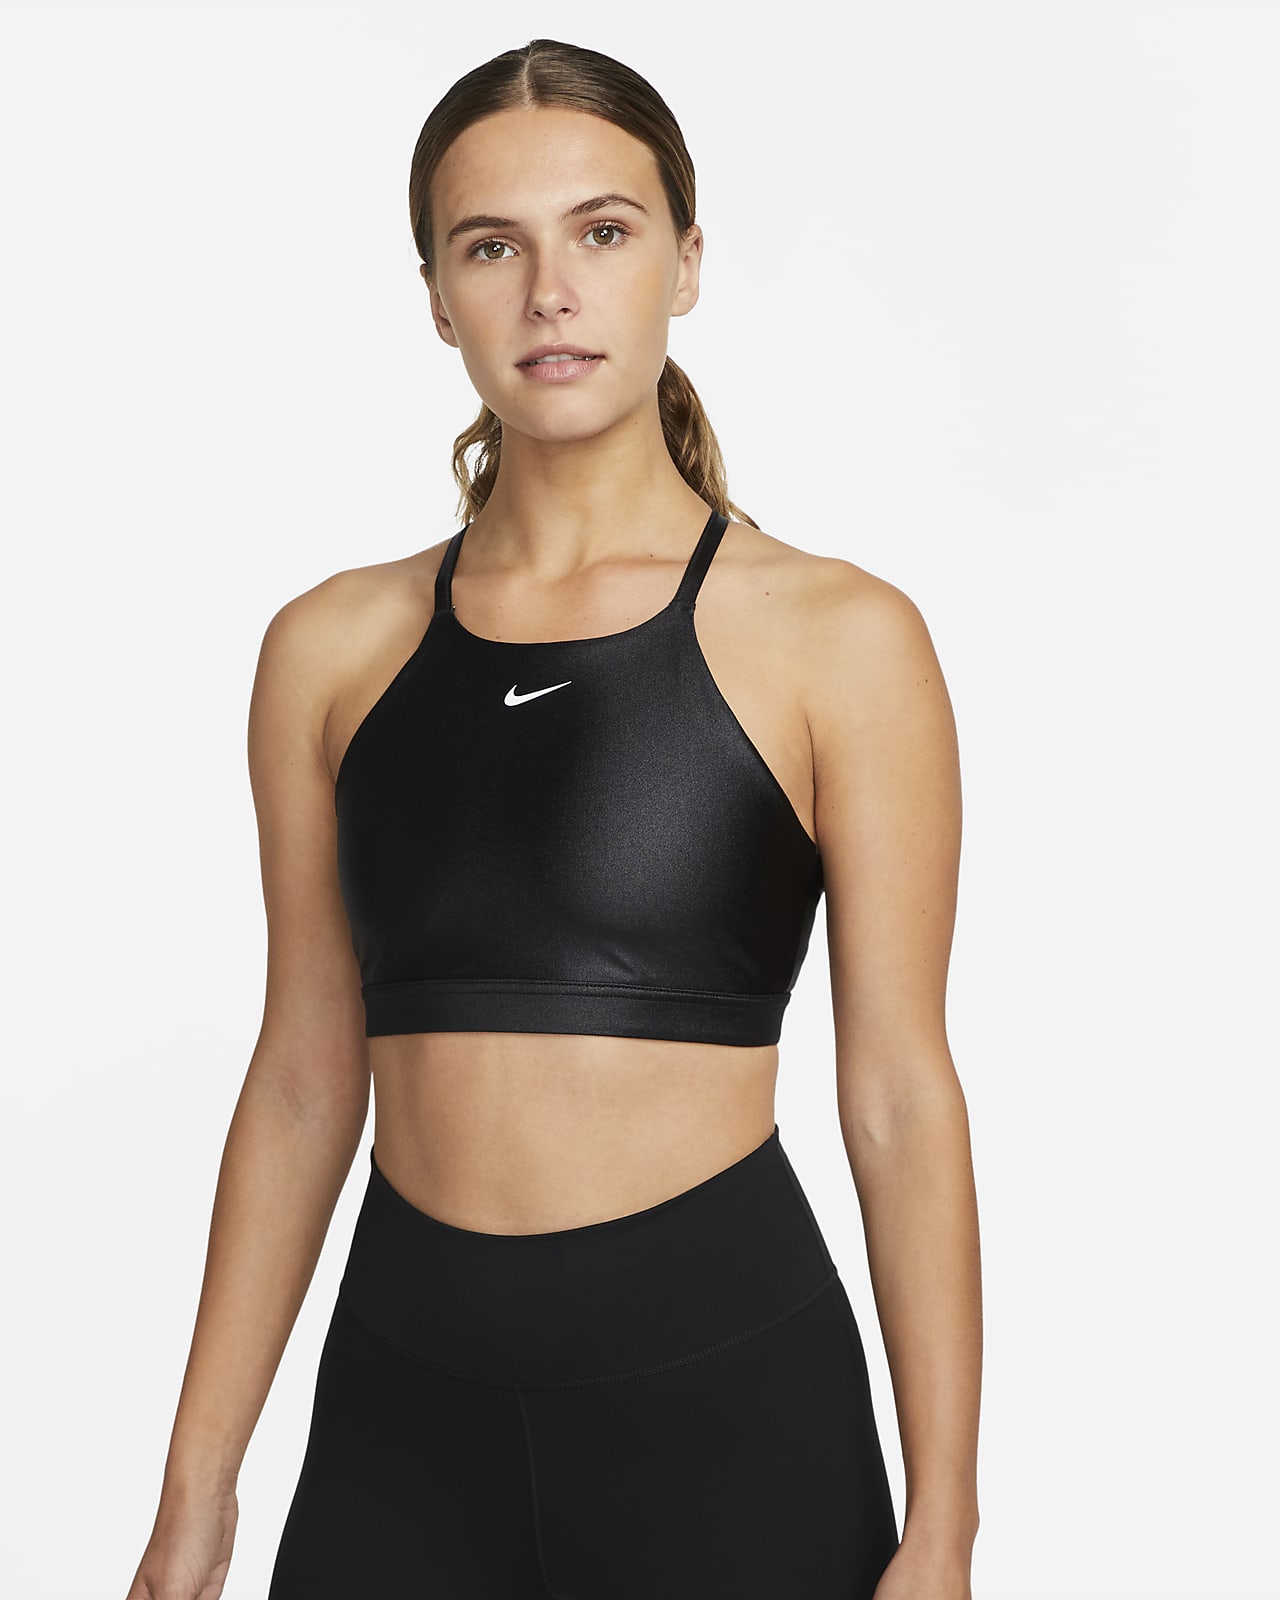 Nike Dri-FIT Indy Shine Women's Light-Support 2-Piece Pad High-Neck ...